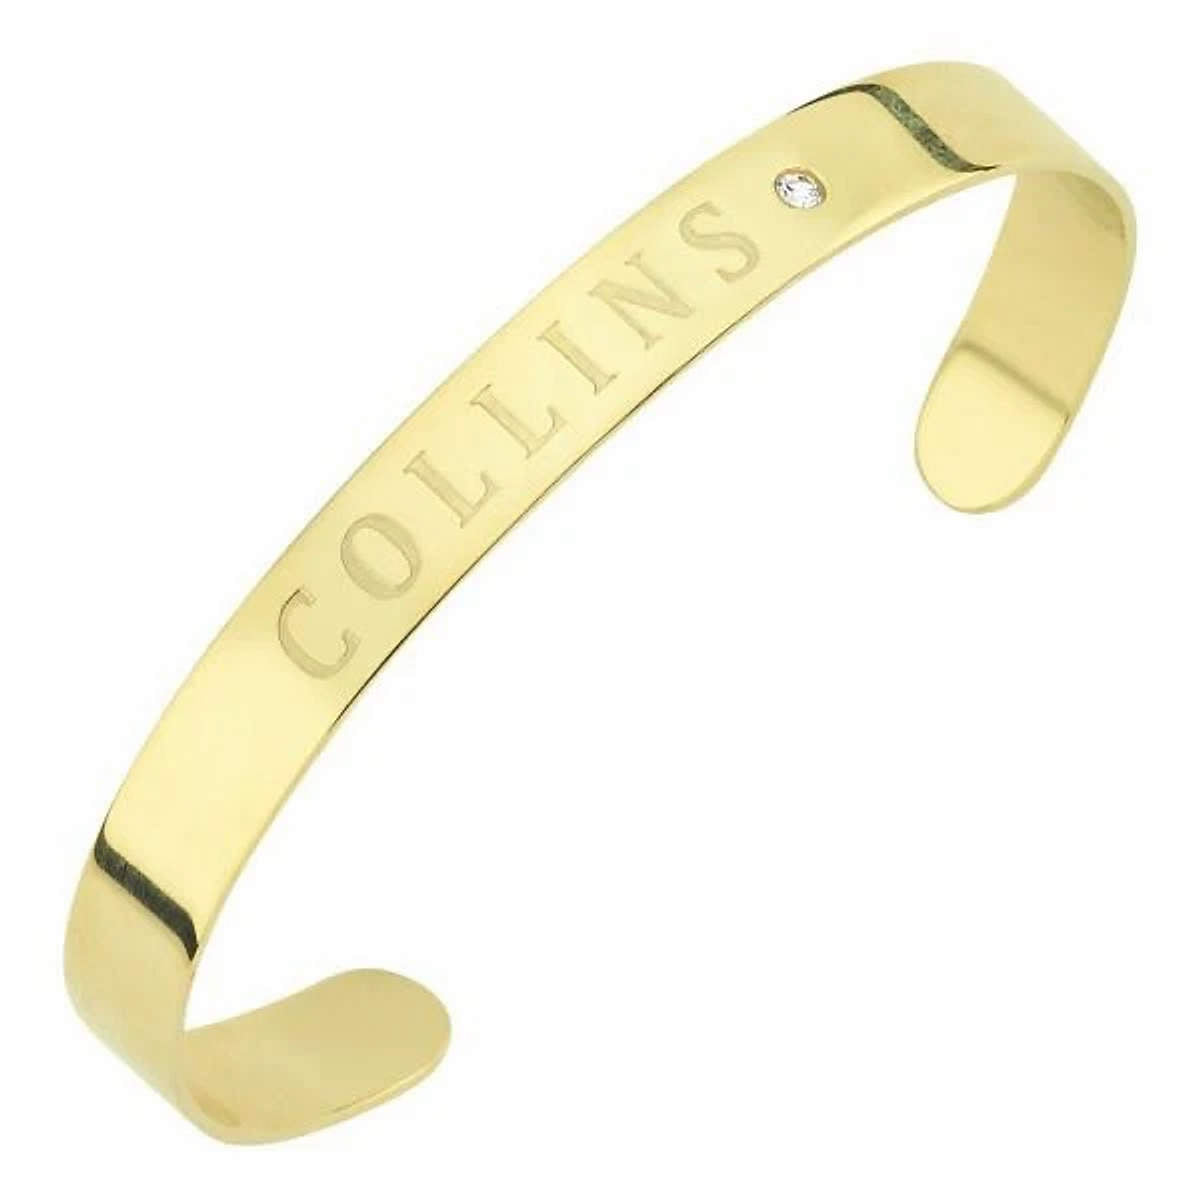 Find Your Center Personalized Bangle